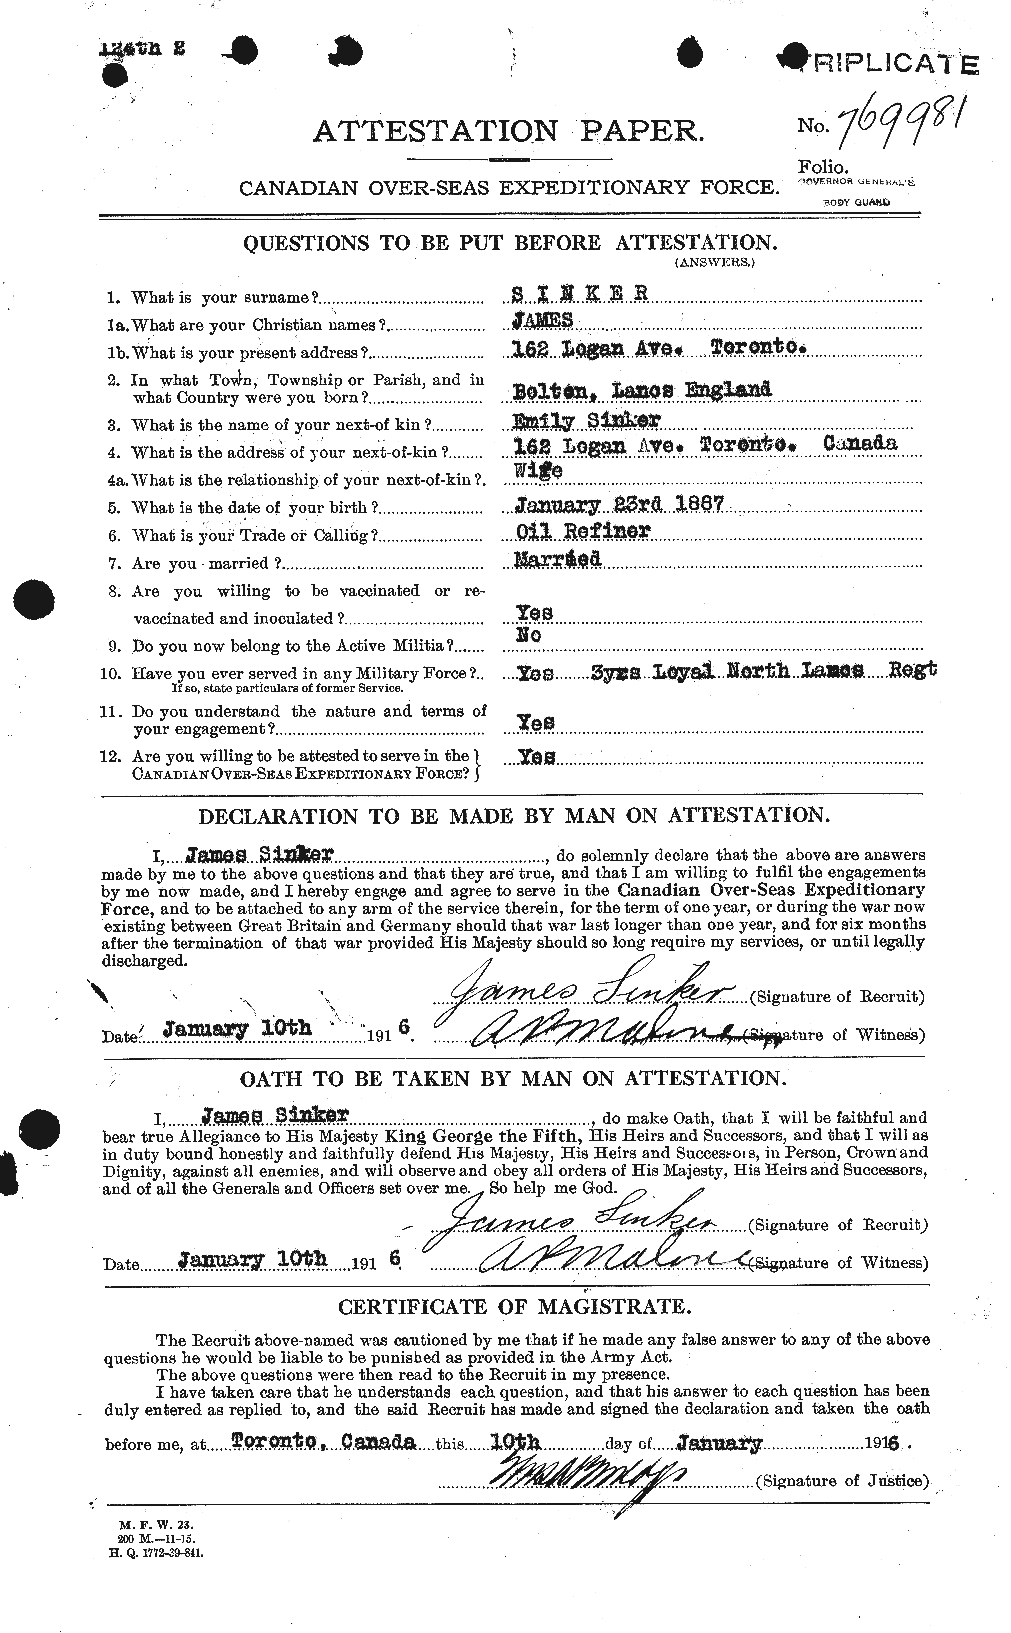 Personnel Records of the First World War - CEF 100354a